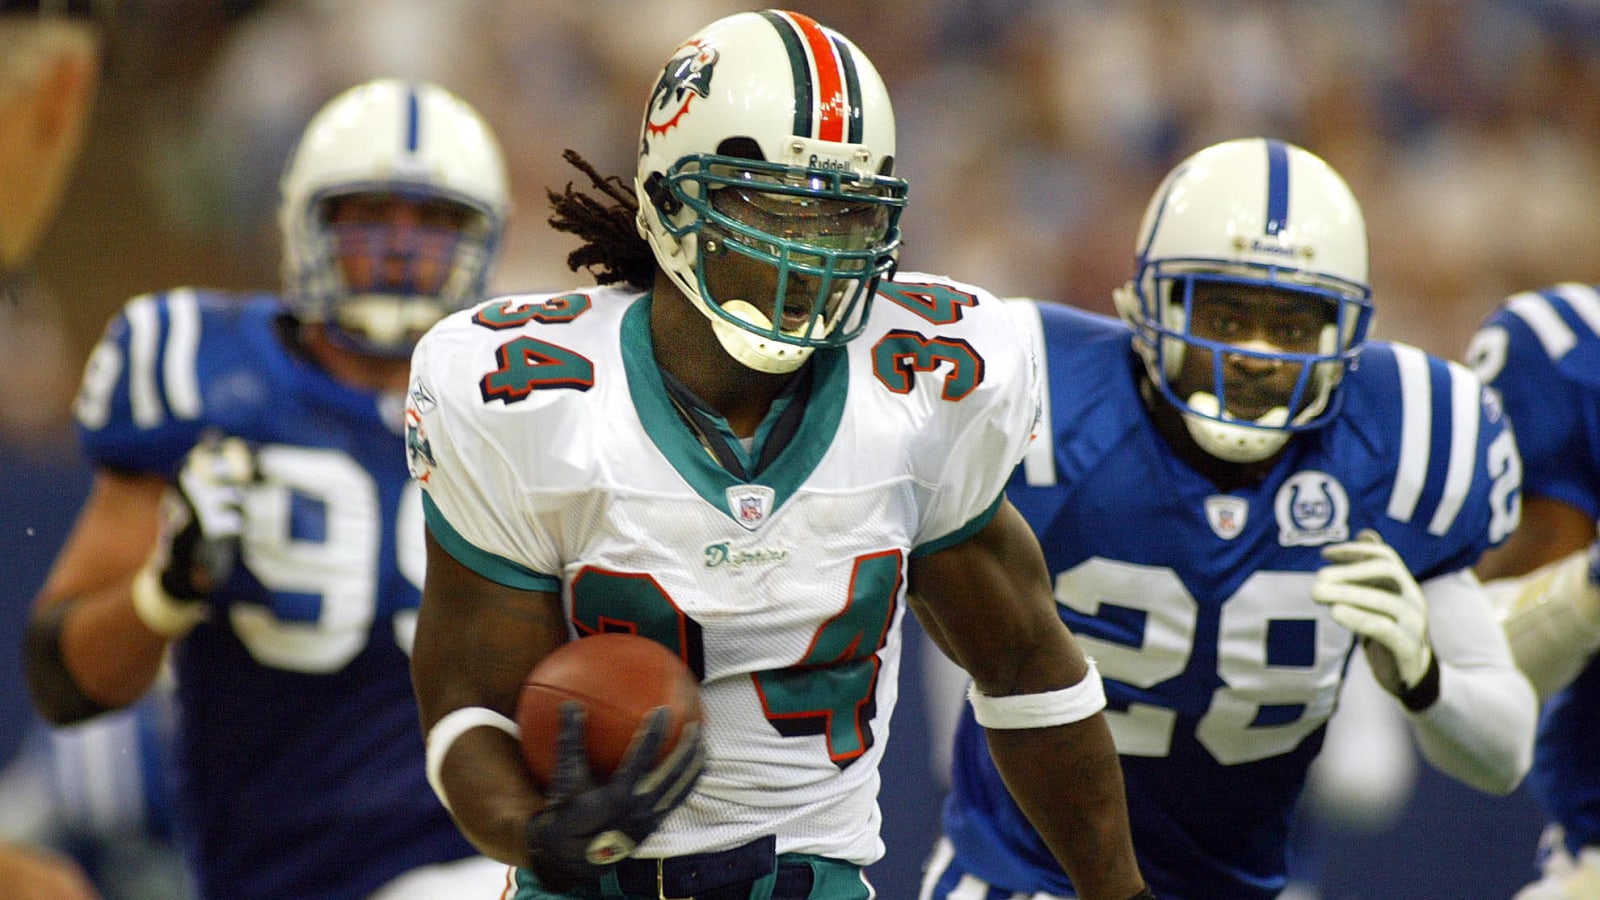 Ricky Williams says he loved playing for Nick Saban in Miami